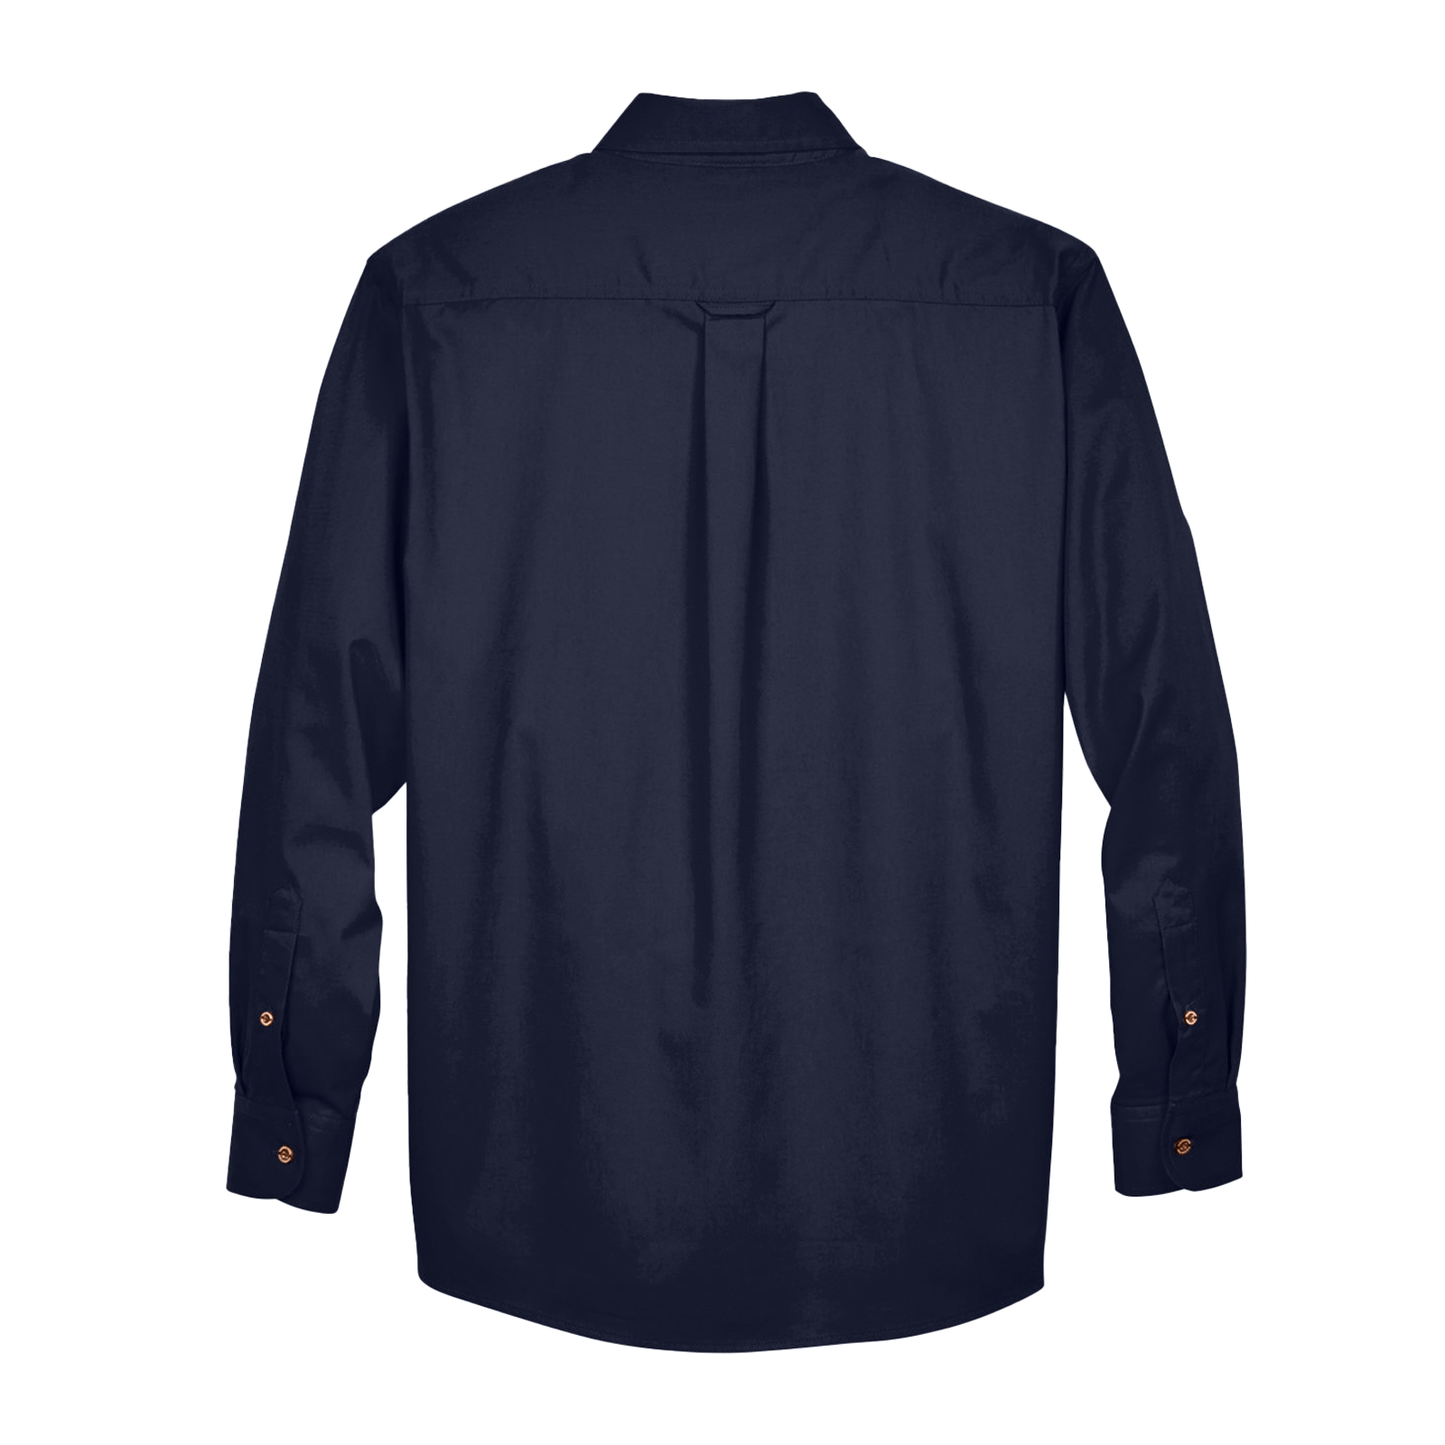 Team USA, Harriton Men's Easy Blend™ Long-Sleeve Twill Shirt with Stain-Release